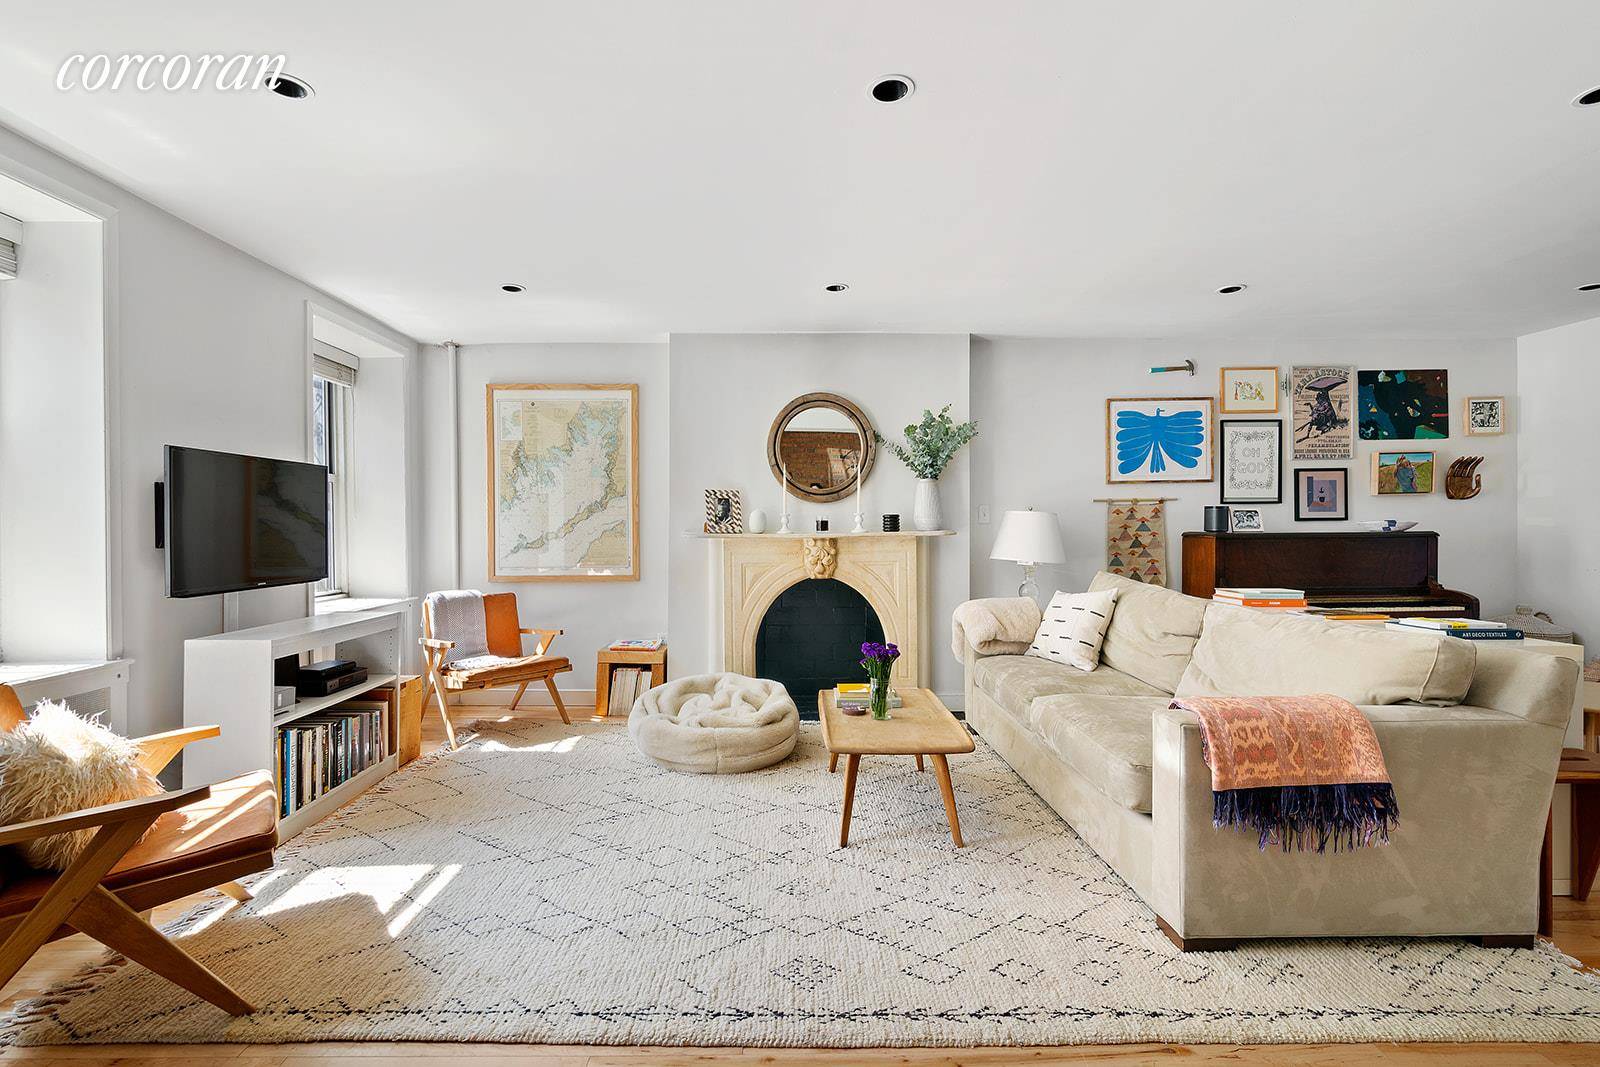 Welcome to 129 Summit Street a federal style, semi attached 20' wide townhome in Carroll Gardens.